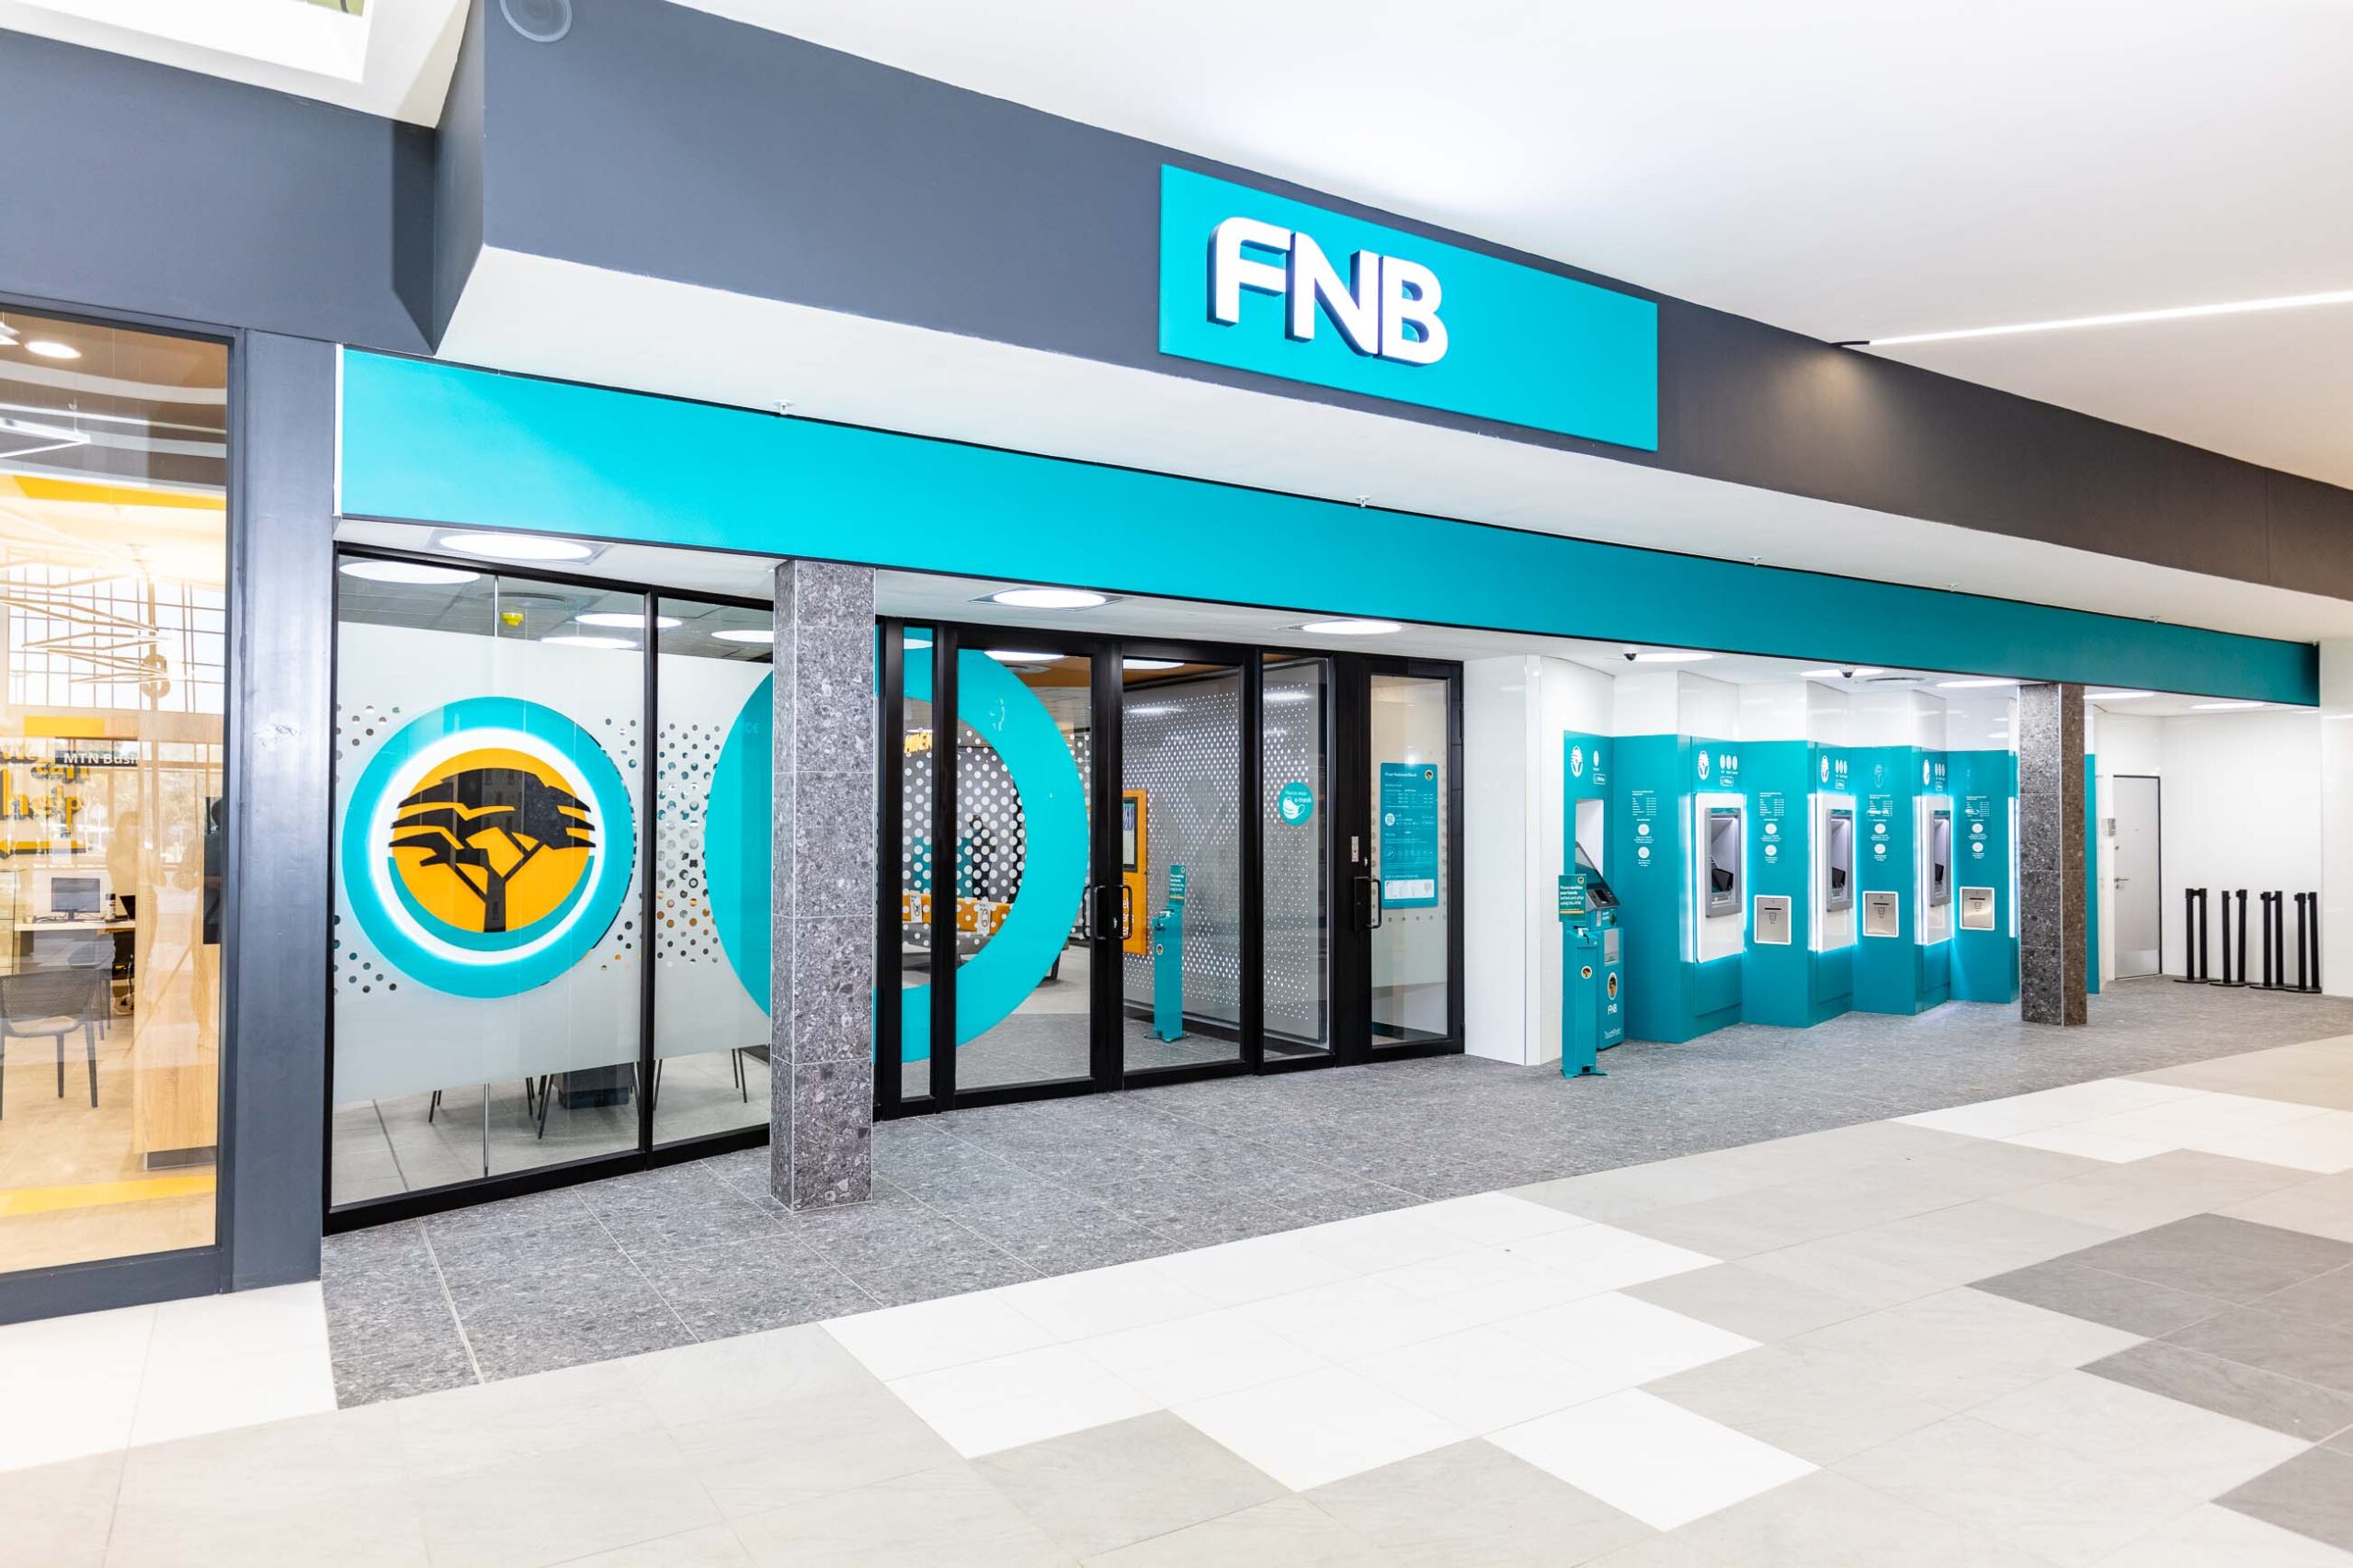 FNB reduces its reliance on diesel-powered generators to lessen emissions in its branches